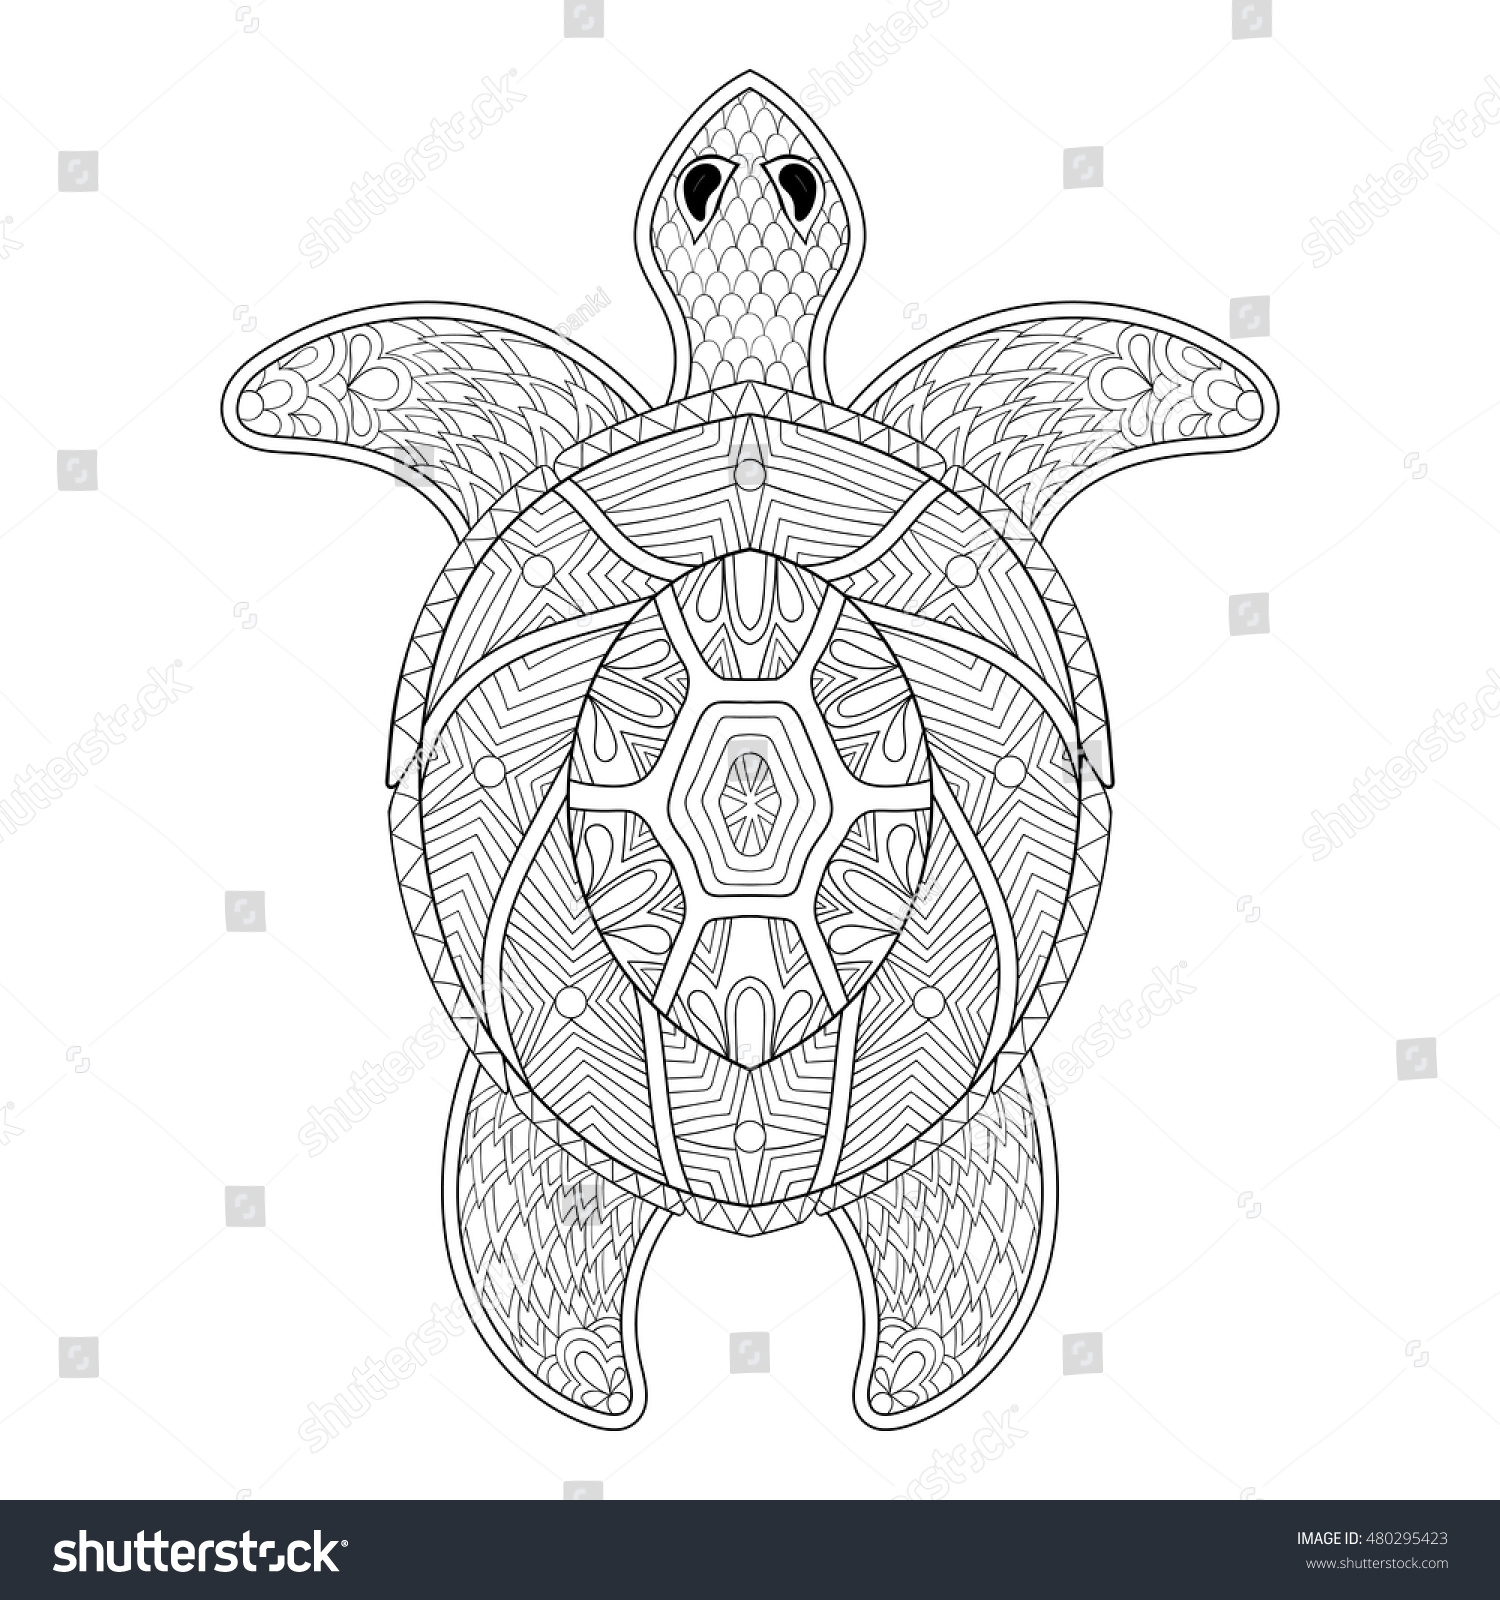 SVG of Turtle in zentangle style. Freehand sketch for adult antistress coloring page with doodle elements. Ornamental artistic vector illustration for tattoo, t-shirt print. Sea animal collection. svg